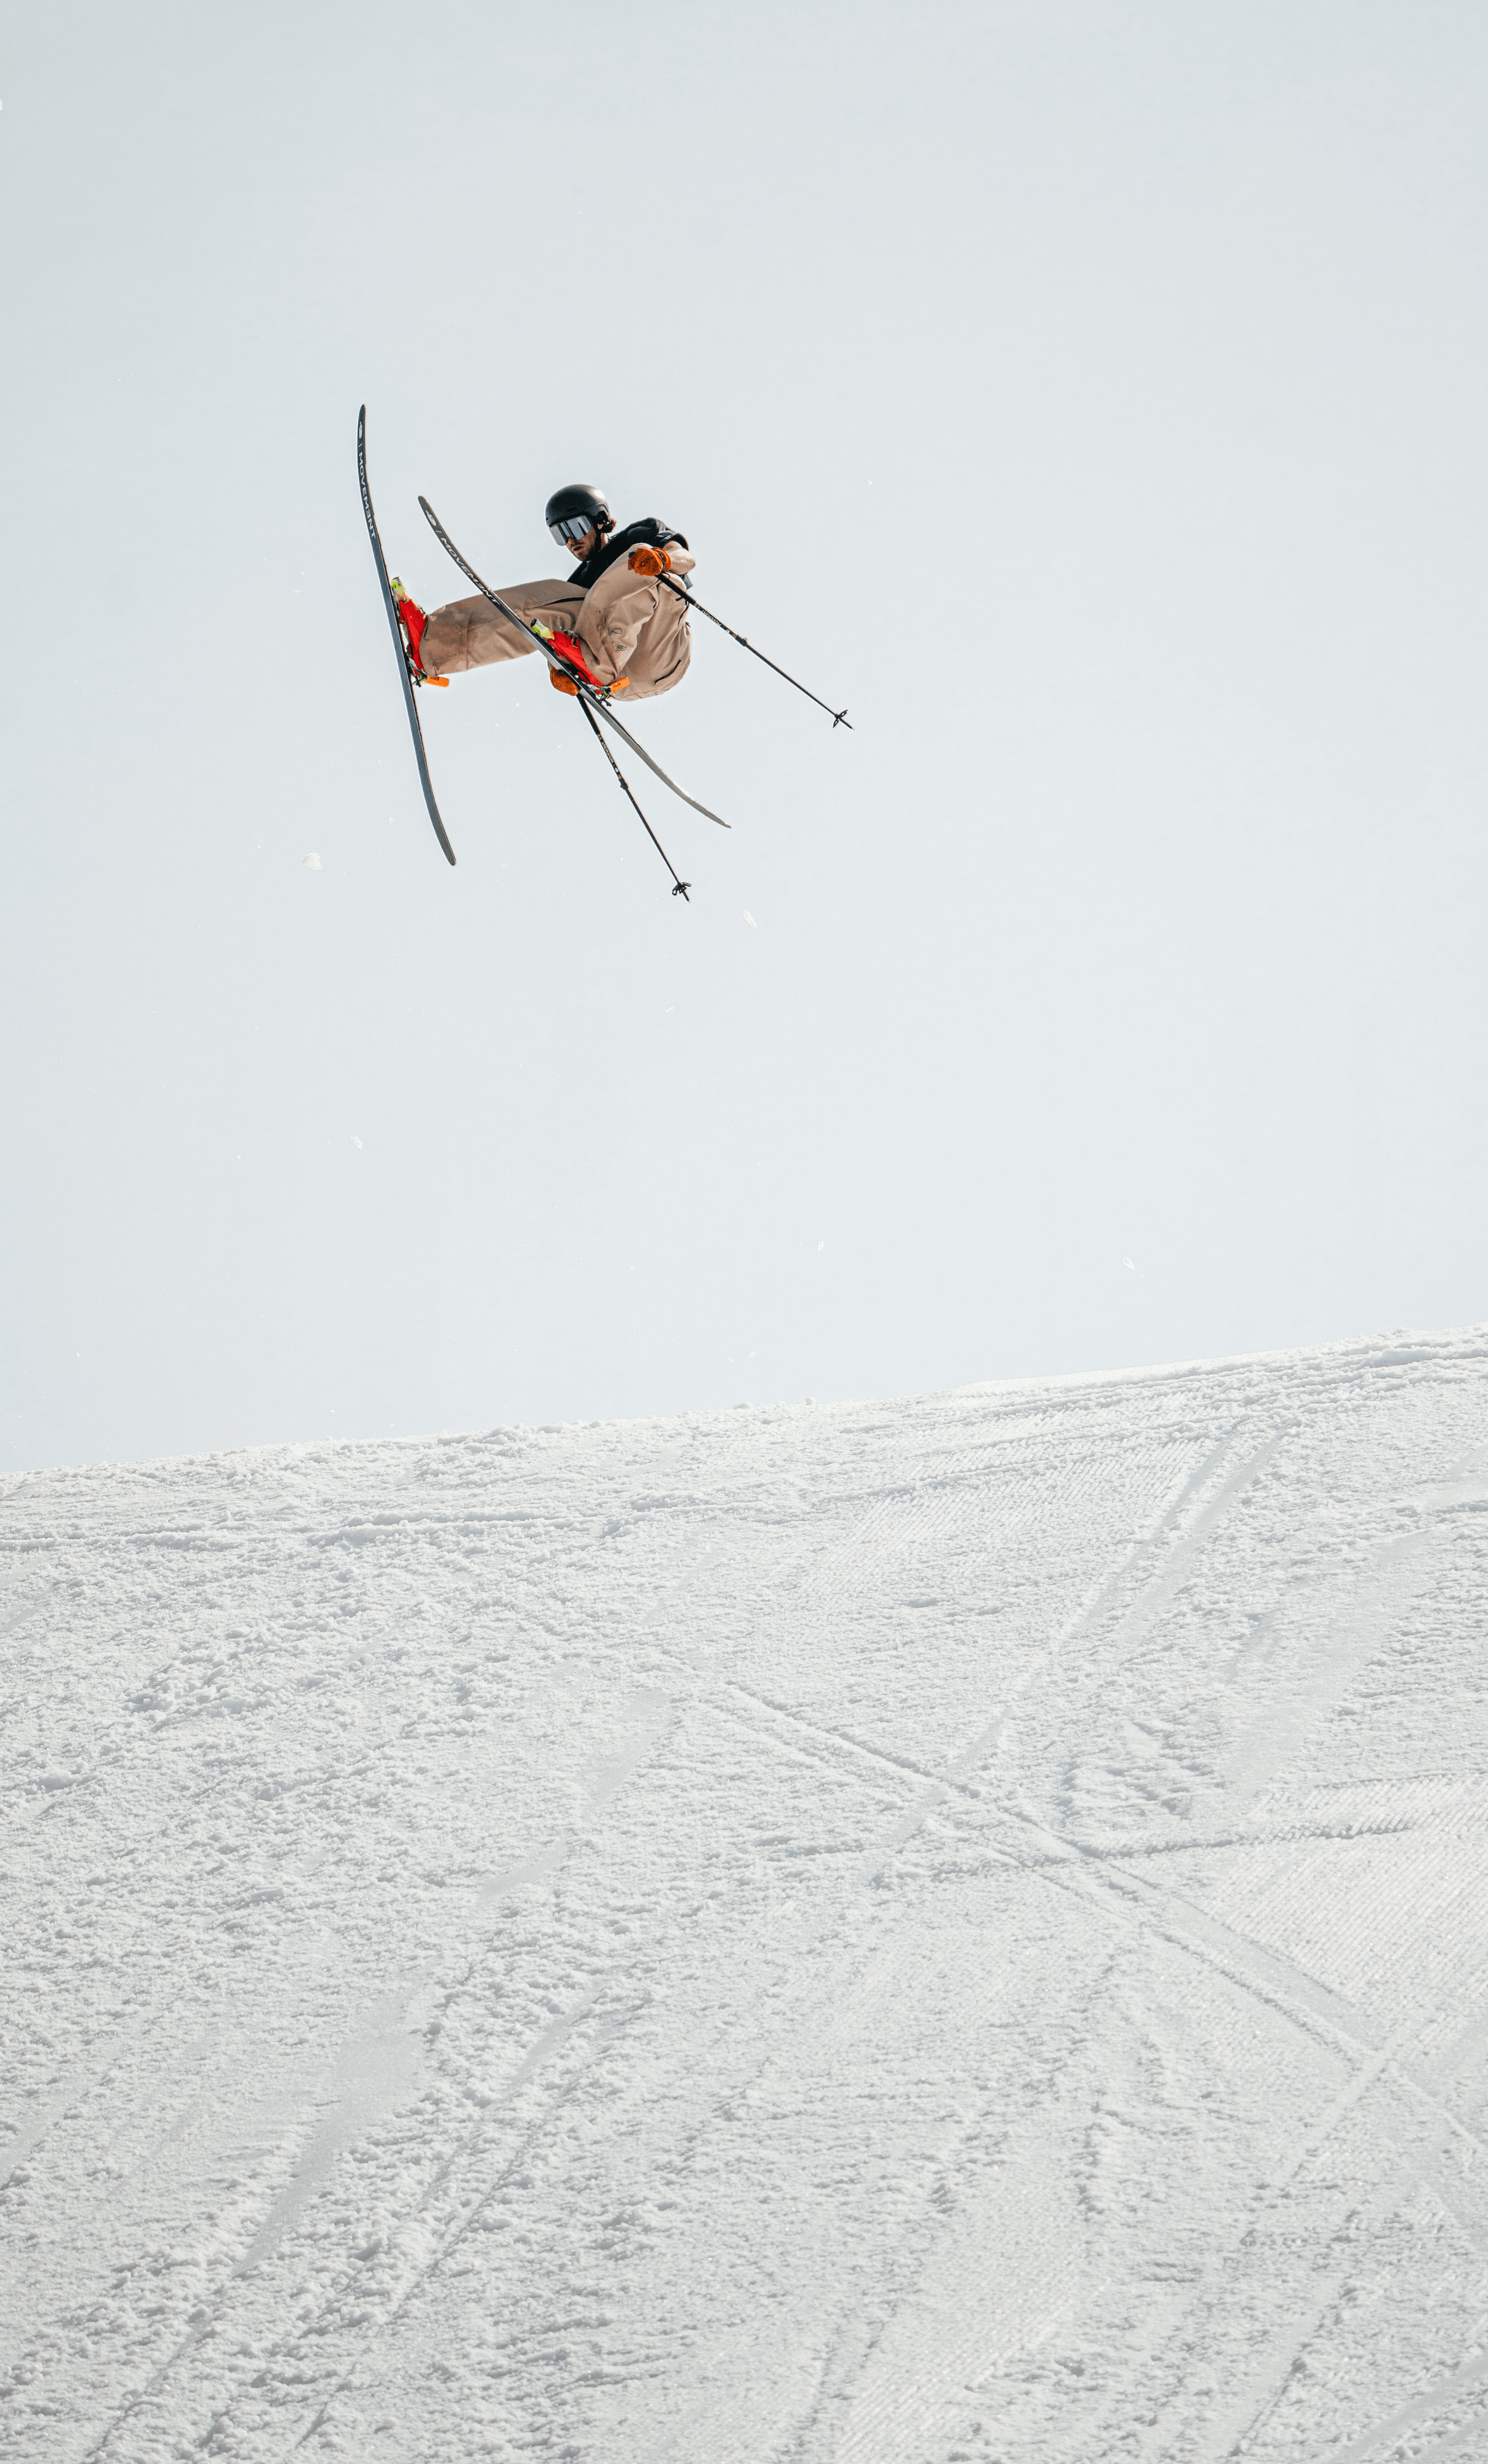 A man jumping with his skis while doing freestyle skiing